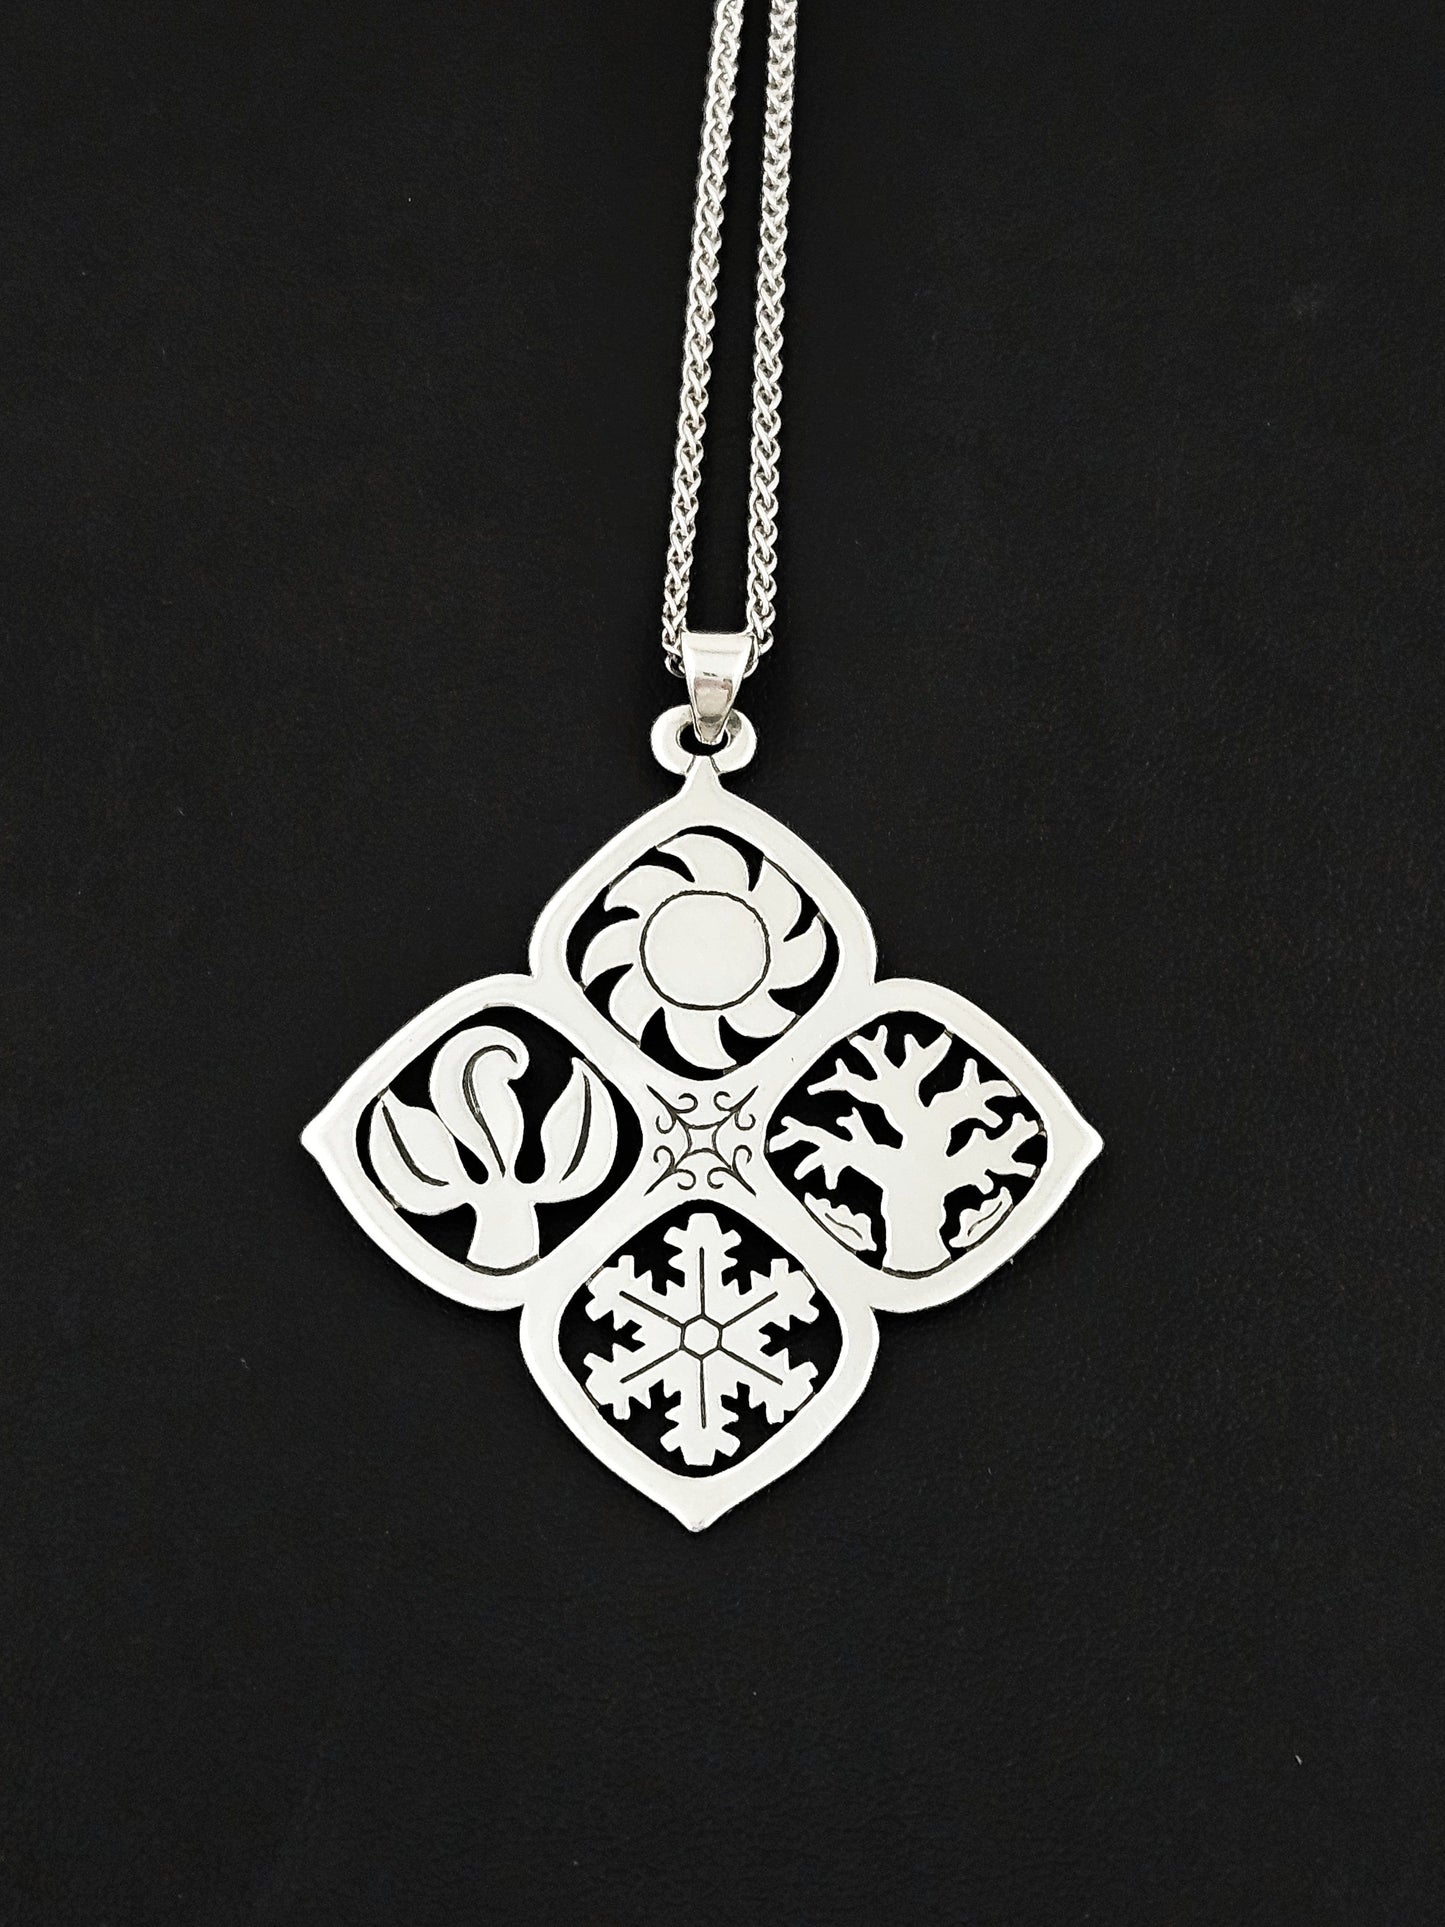 James Avery Jewelry NWOT Retired James Avery Sterling Silver Four Seasons Pendant Necklace NIB